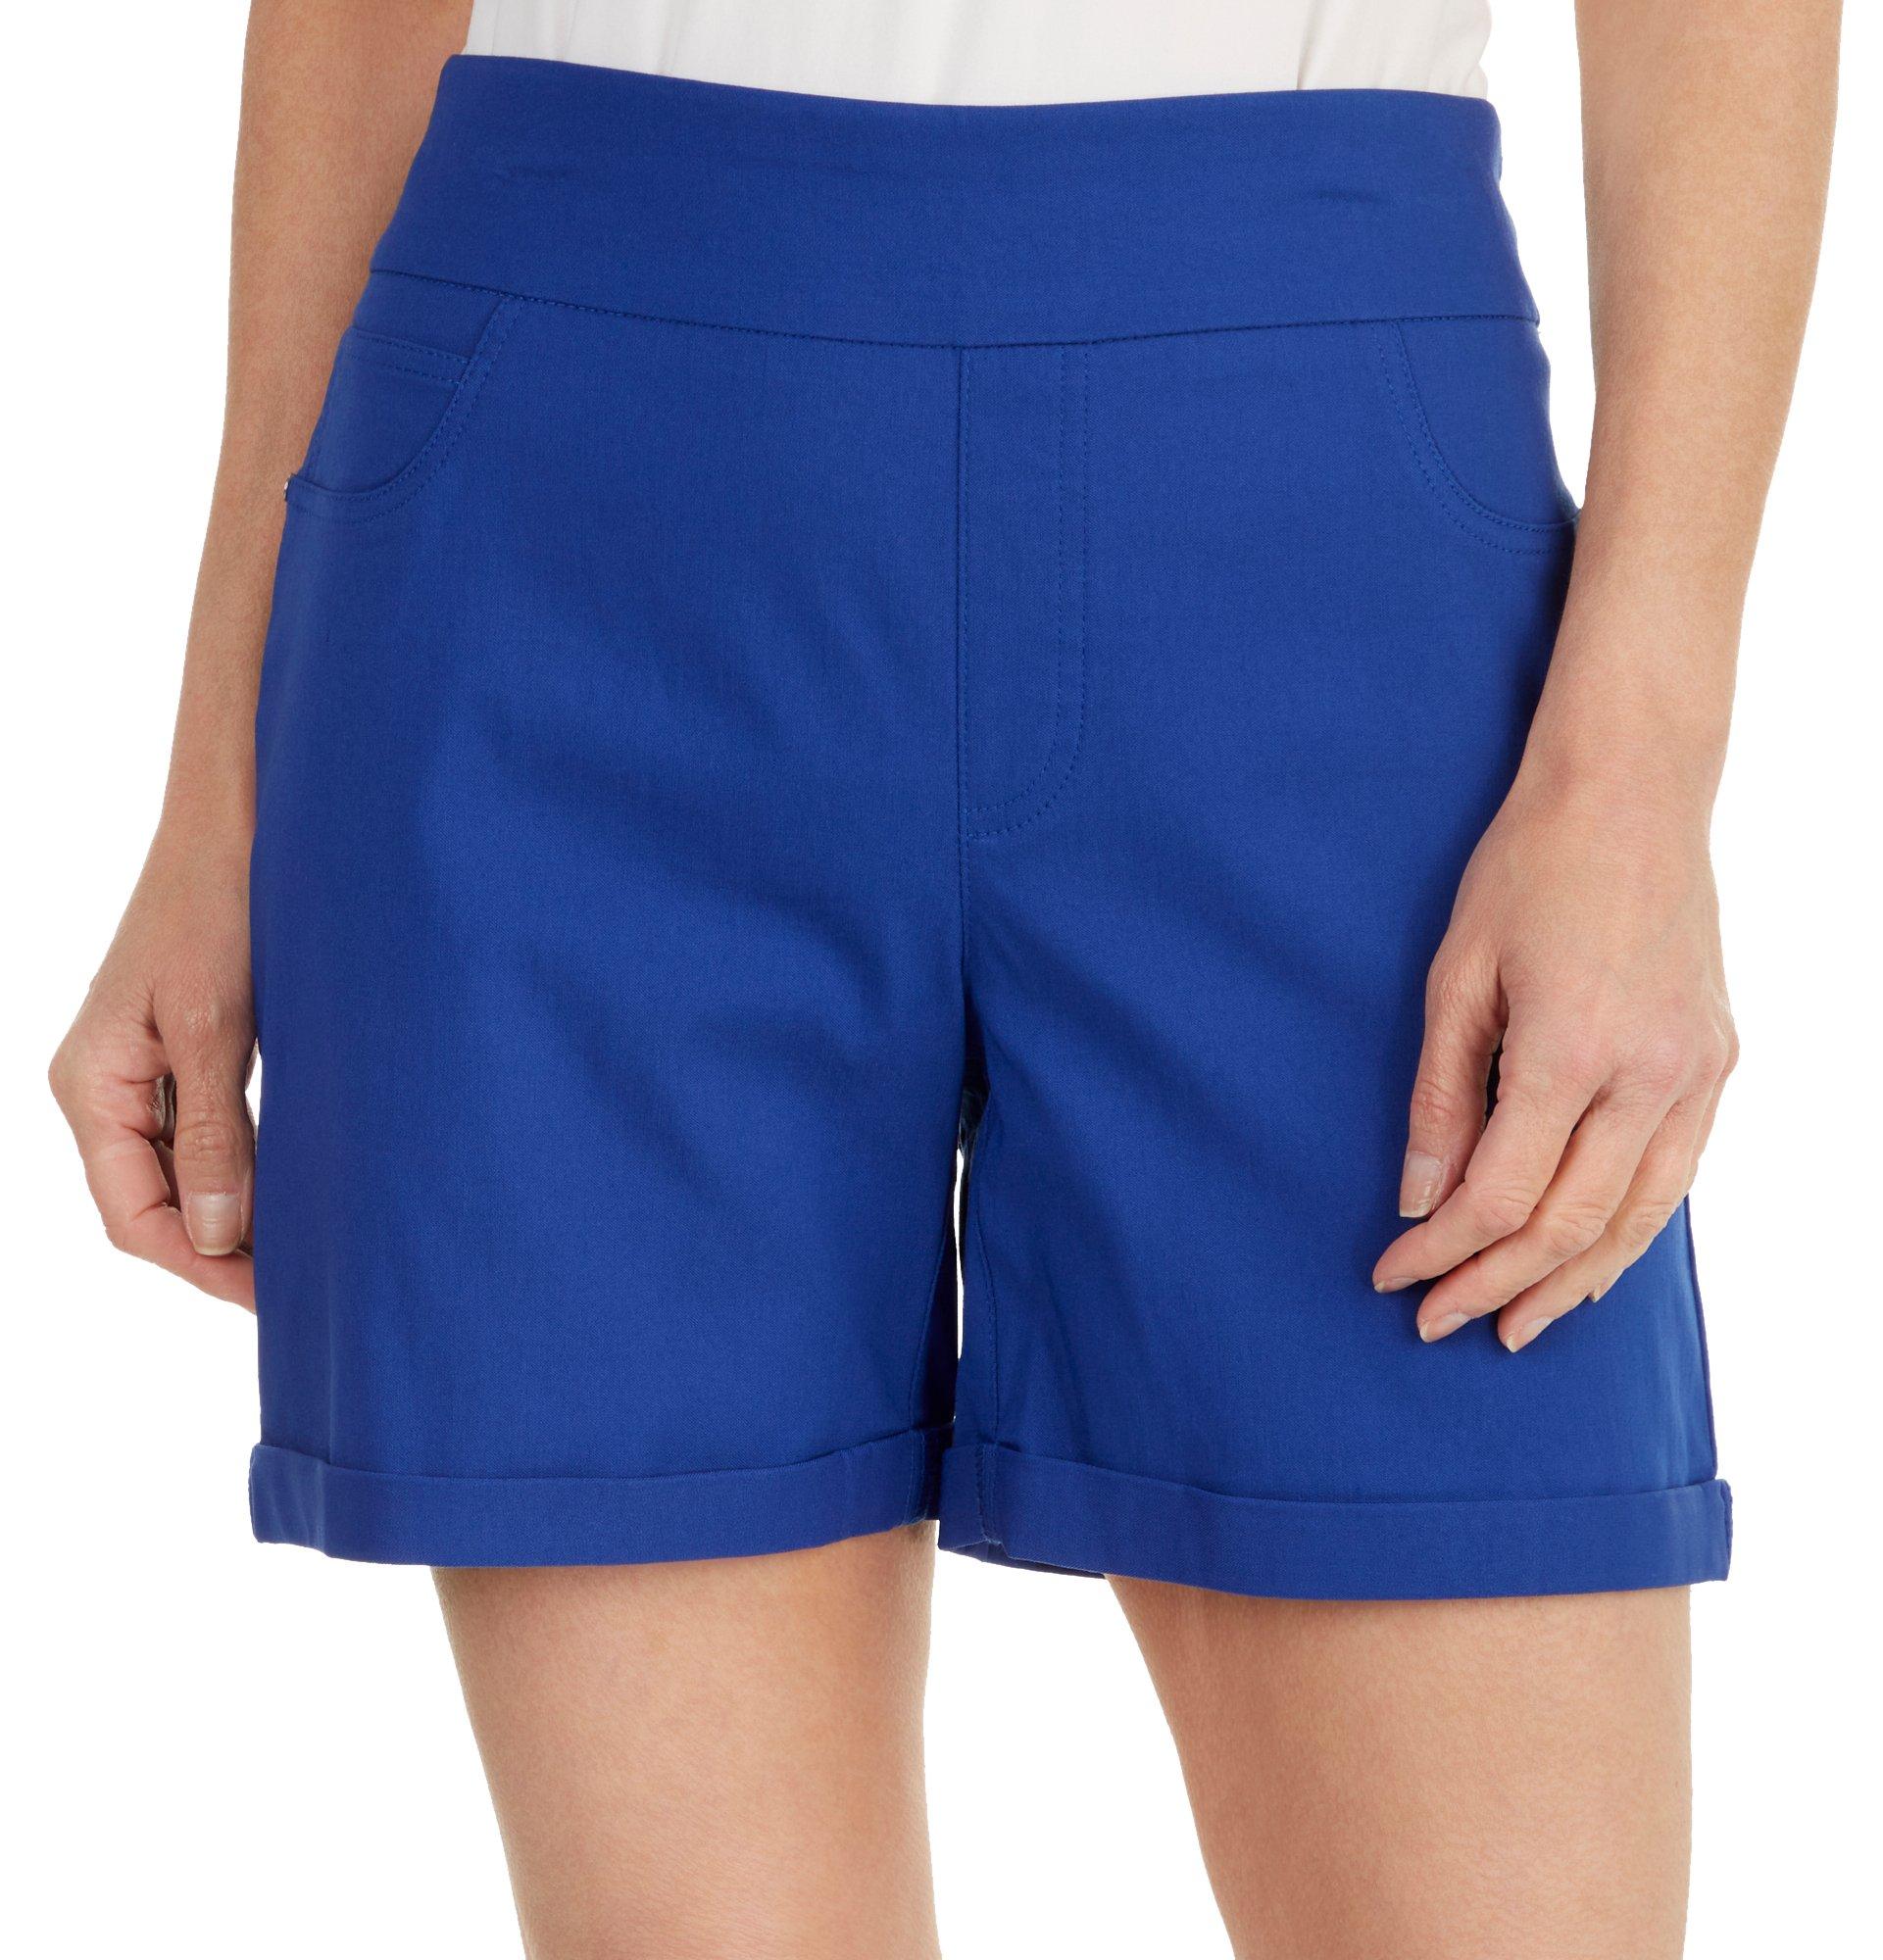 Womens Solid Pull-On Shorts